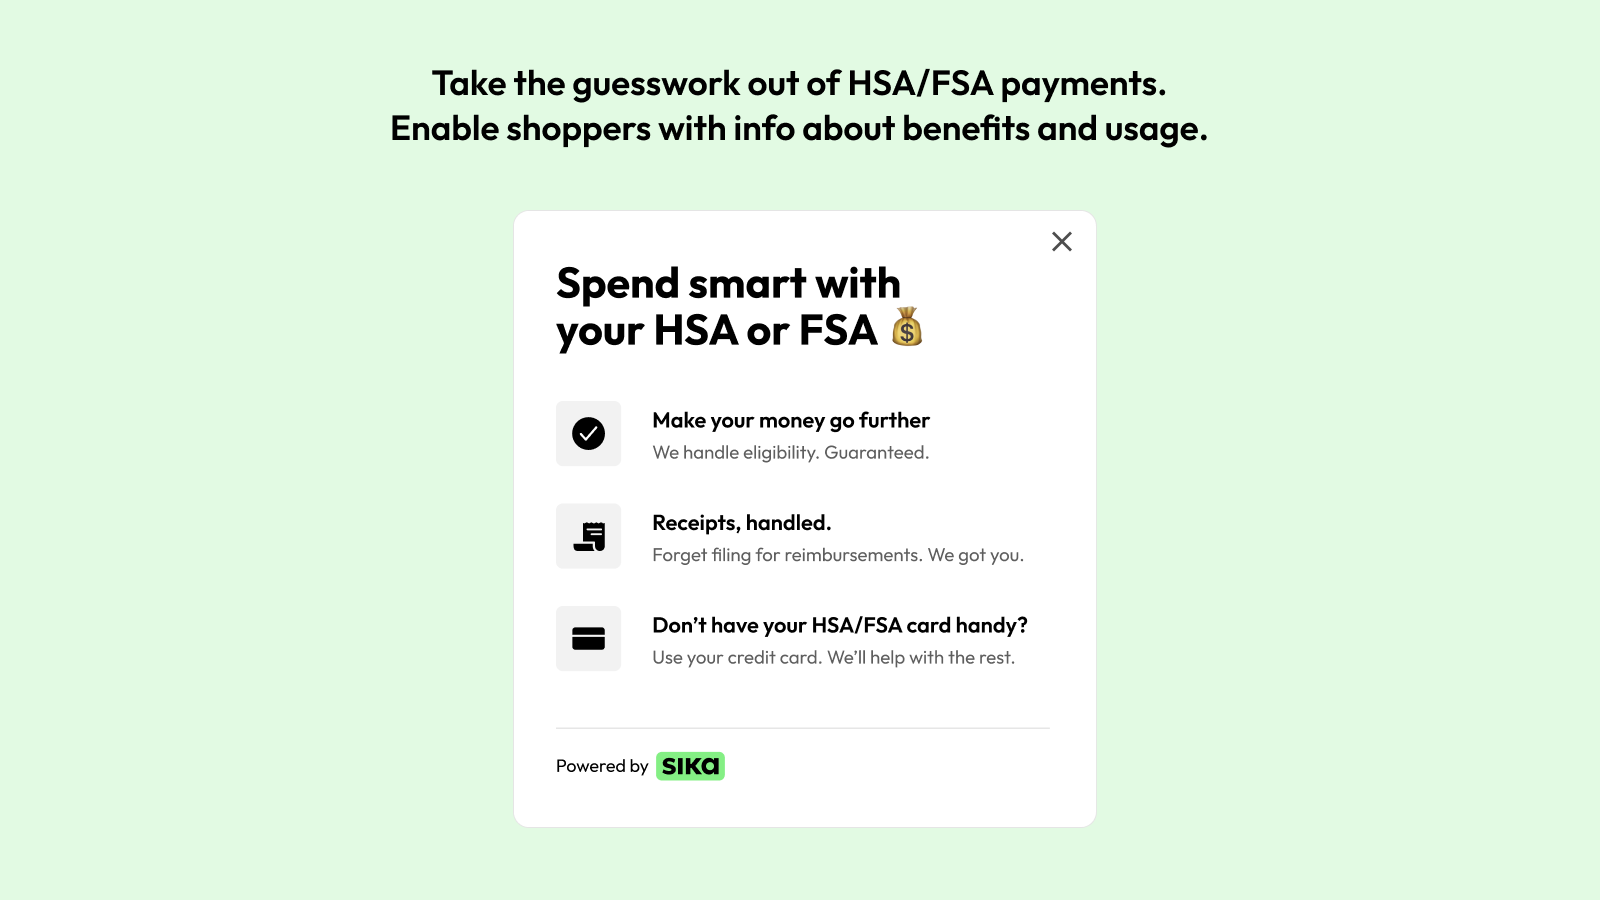 Take the guesswork out of HSA/FSA payments.